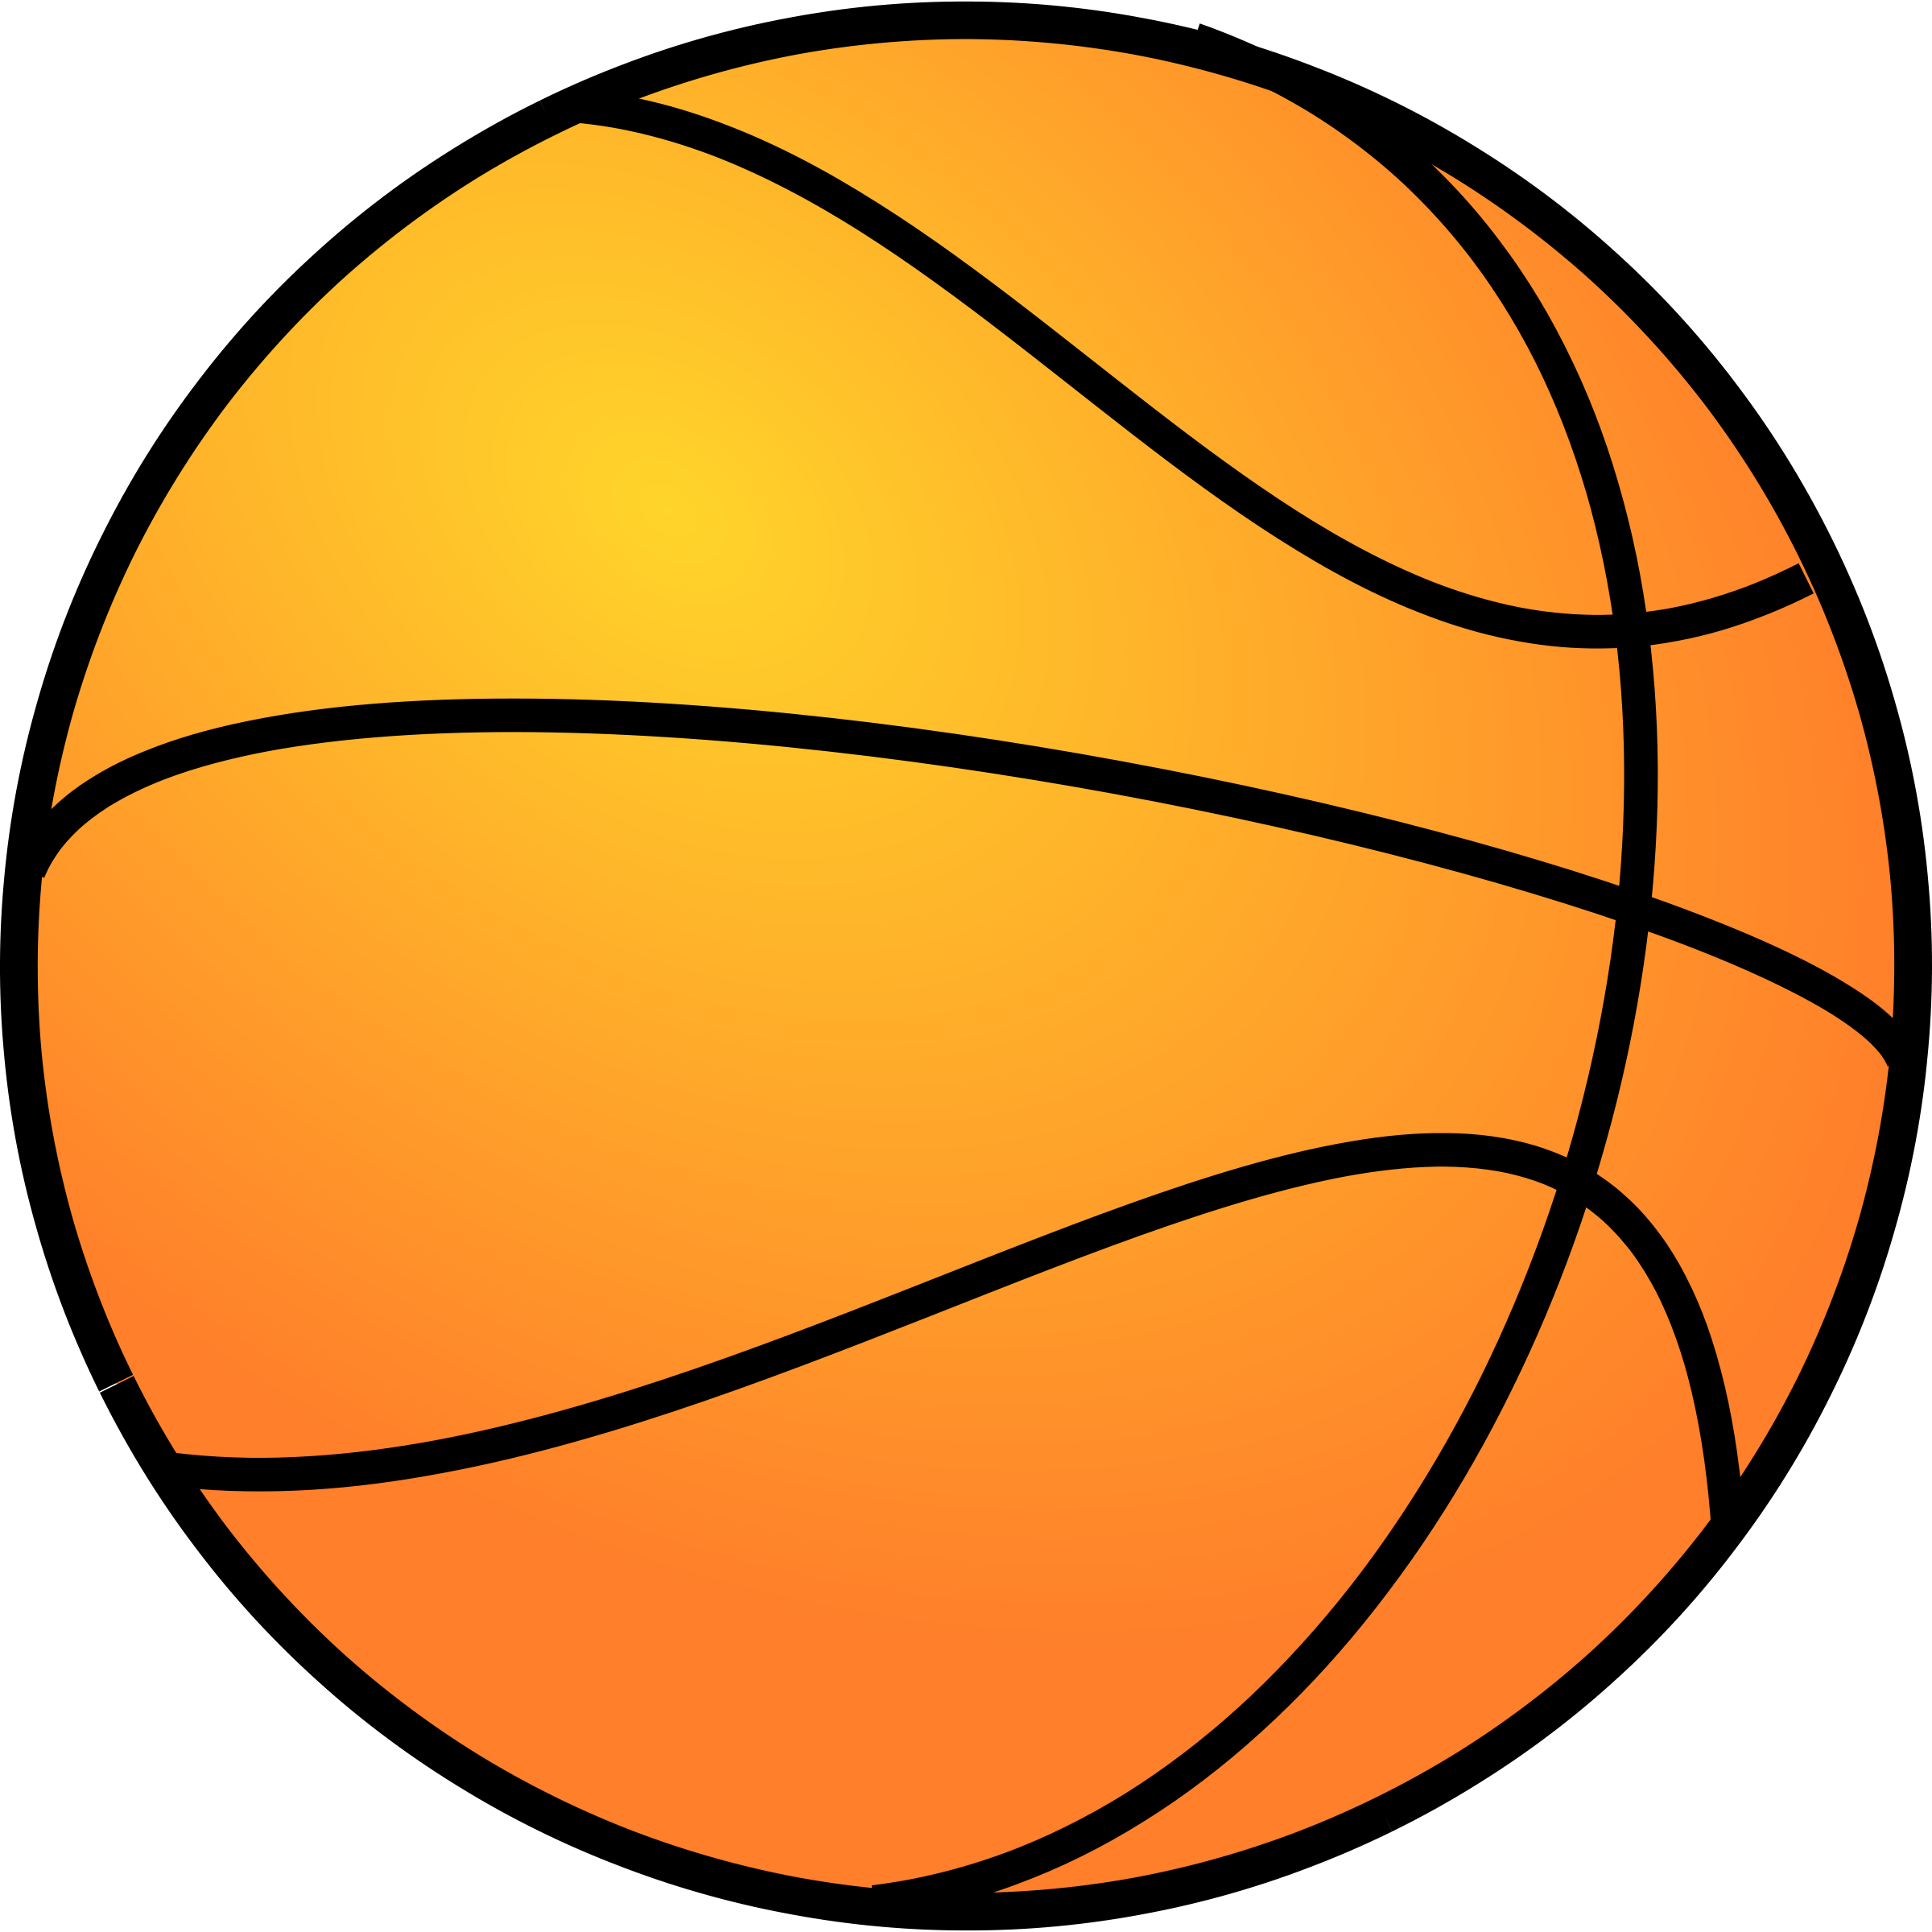 Images Of A Basketball | Free Download Clip Art | Free Clip Art ...